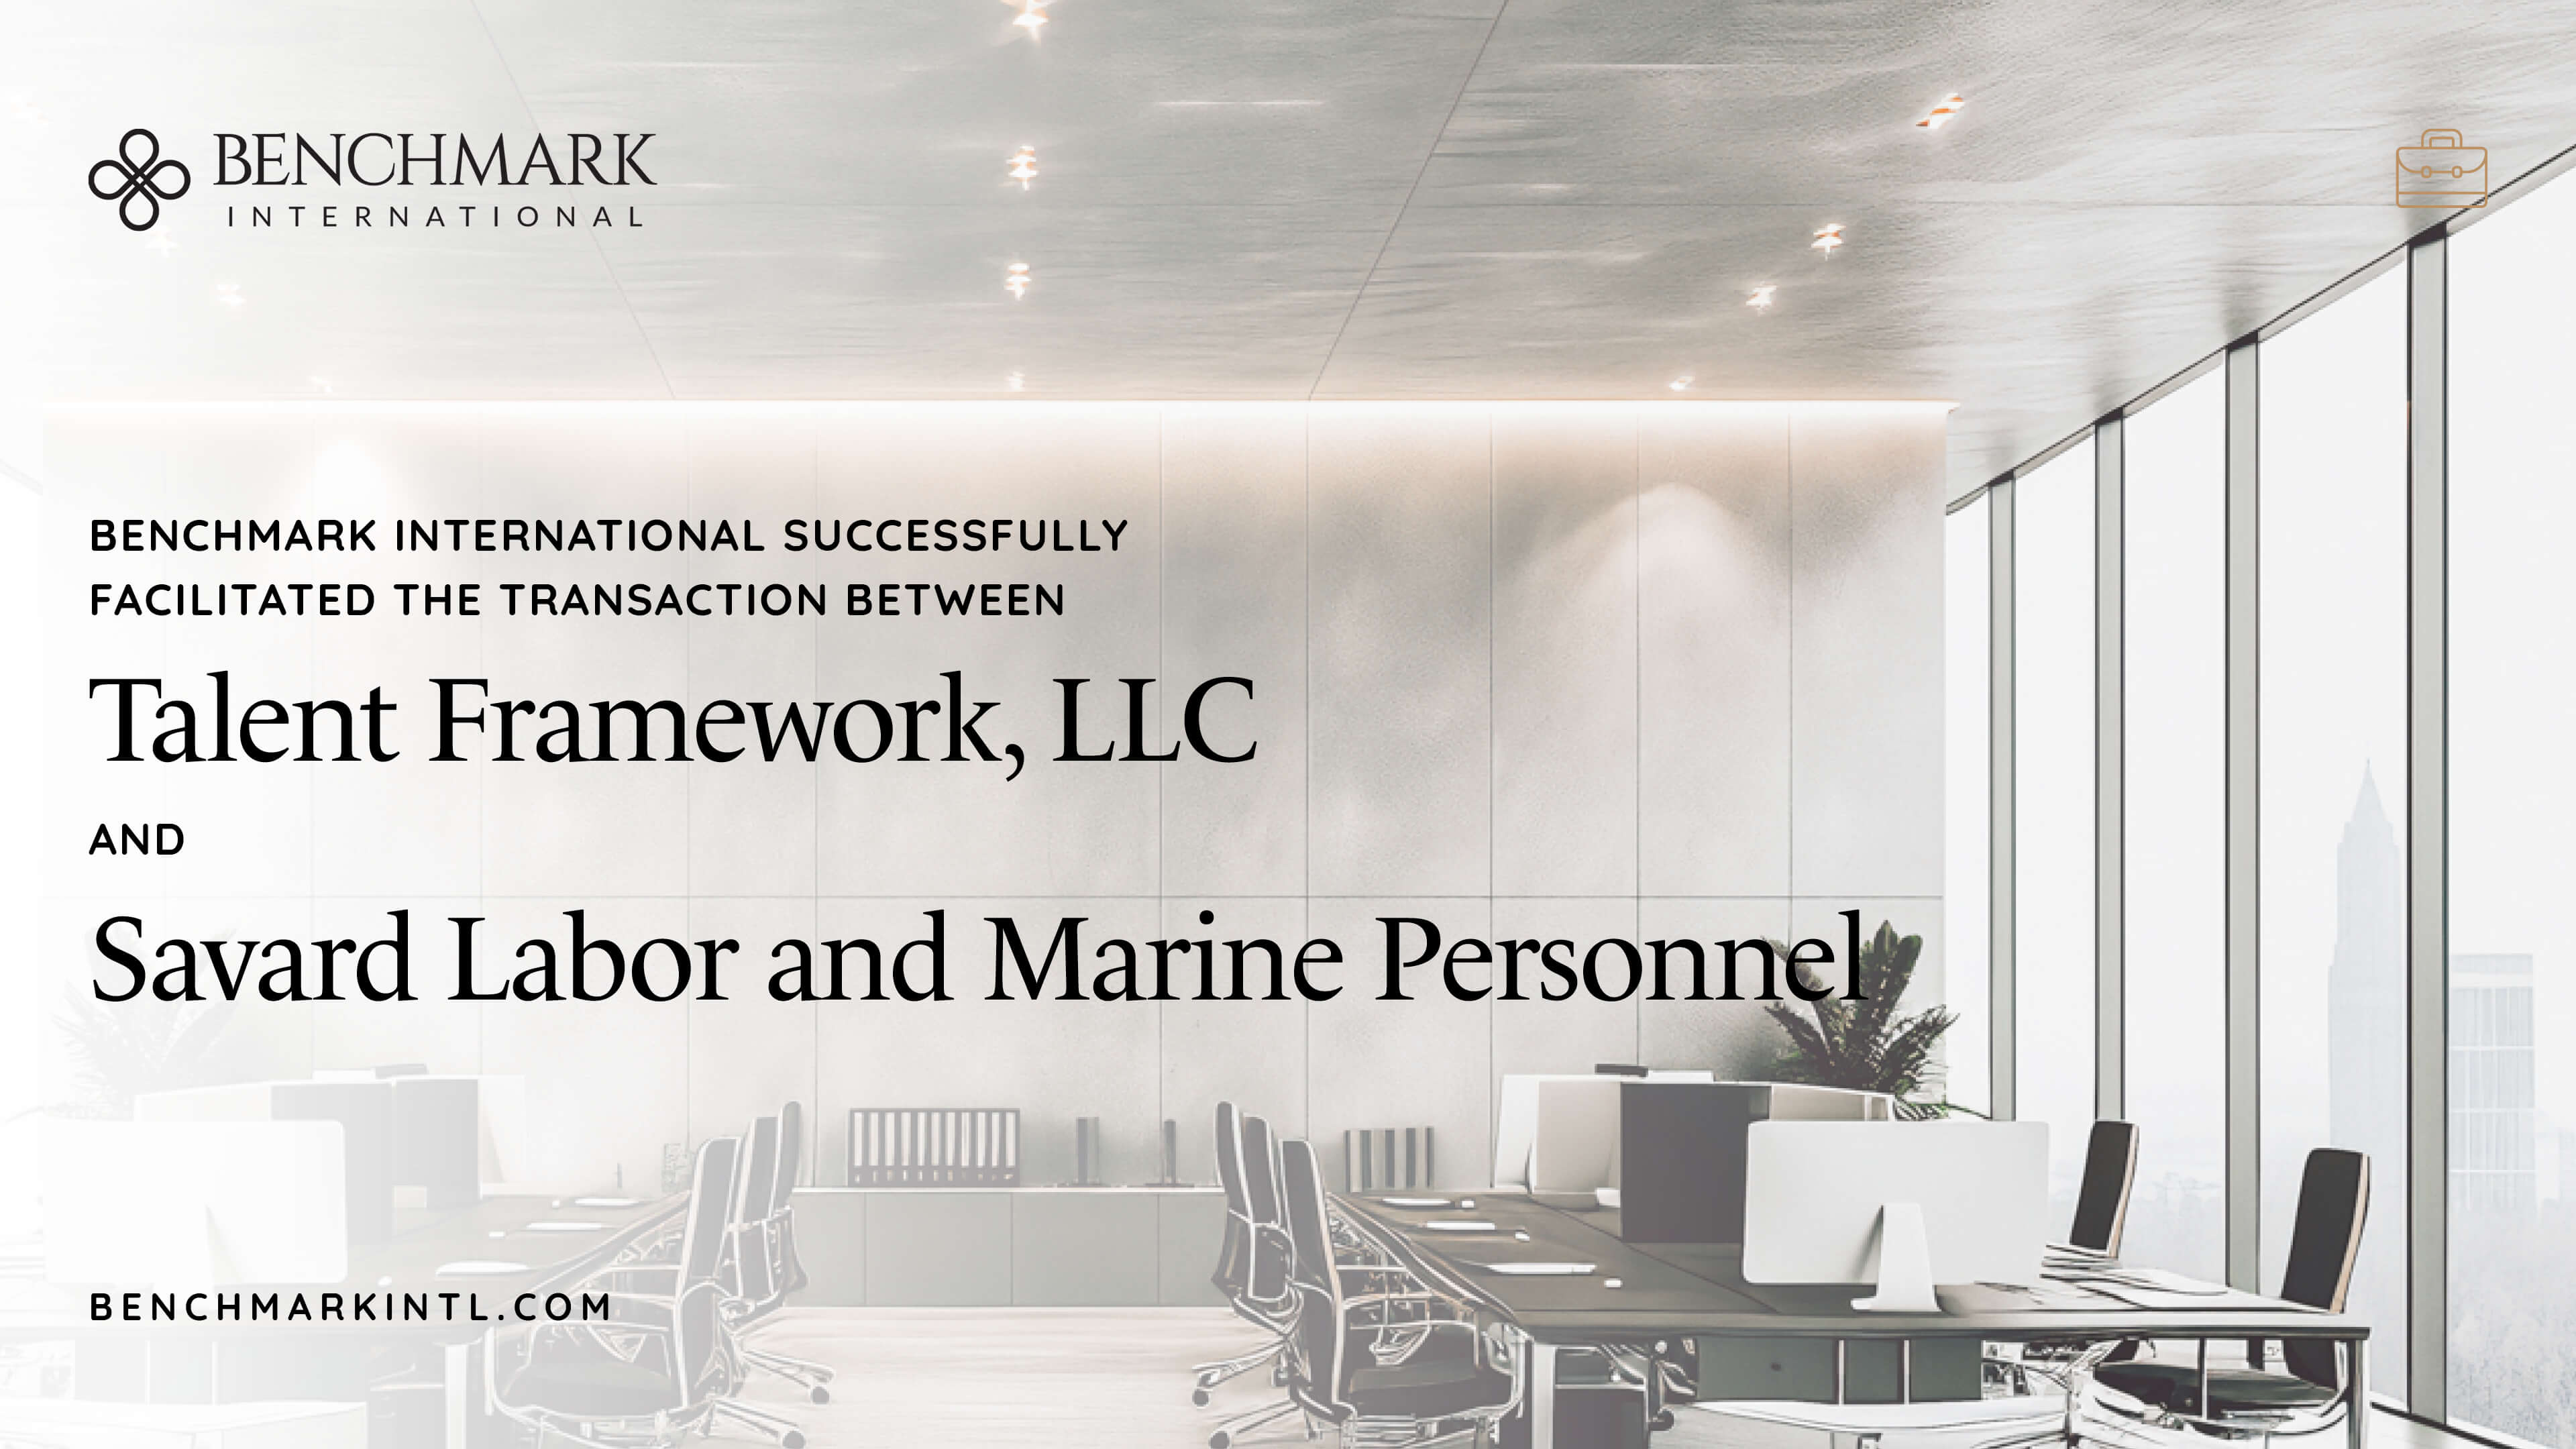 Benchmark International Successfully Facilitated the Transaction Between Talent Framework, LLC and Savard Labor and Marine Personnel